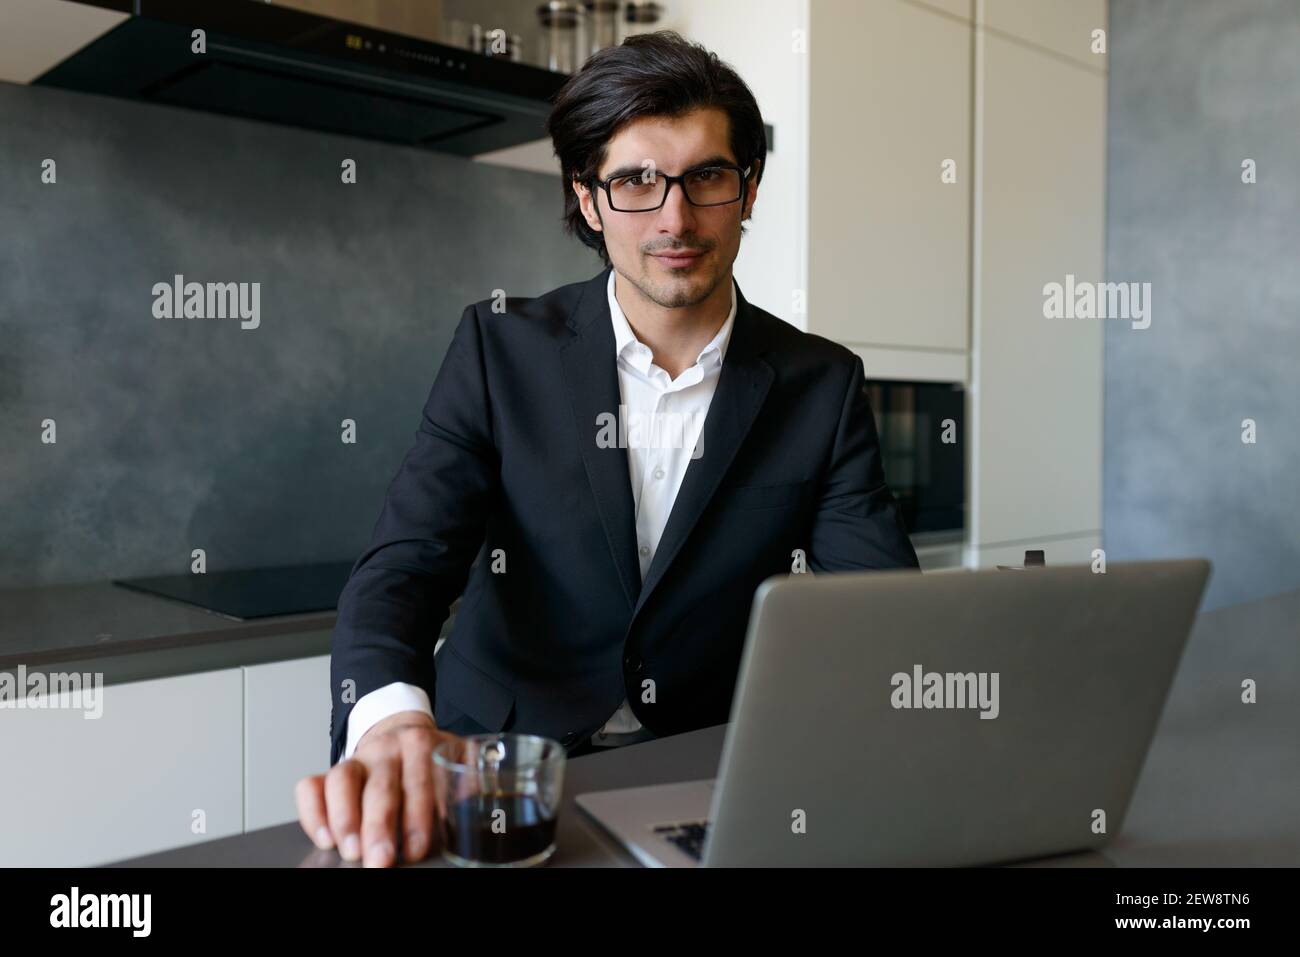 Man teleworker works at home with a laptop Stock Photo